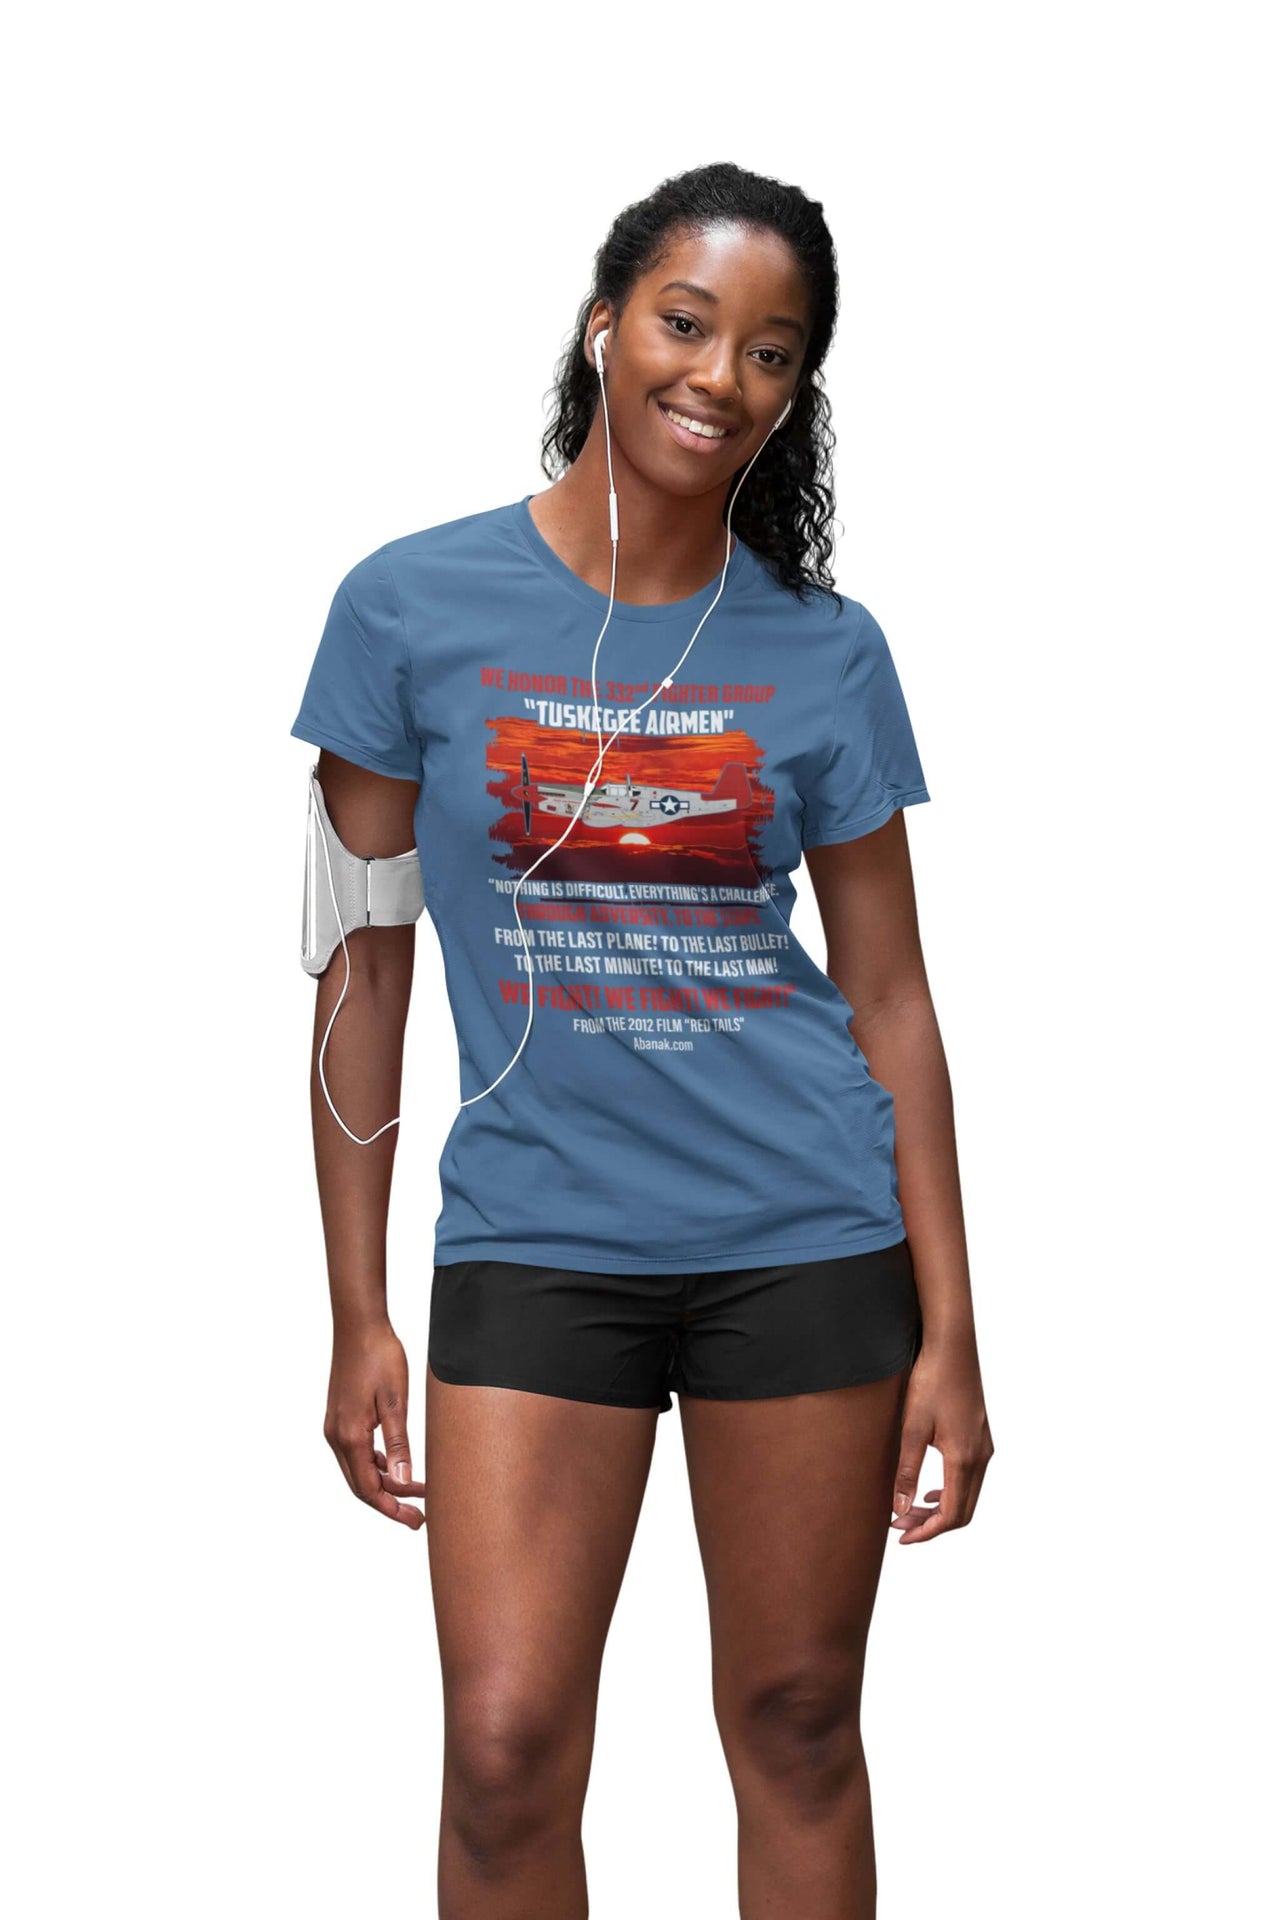 We Fight, We Fight, We Fight - Red Tails Inspirational Quote - Women's Vintage Tee